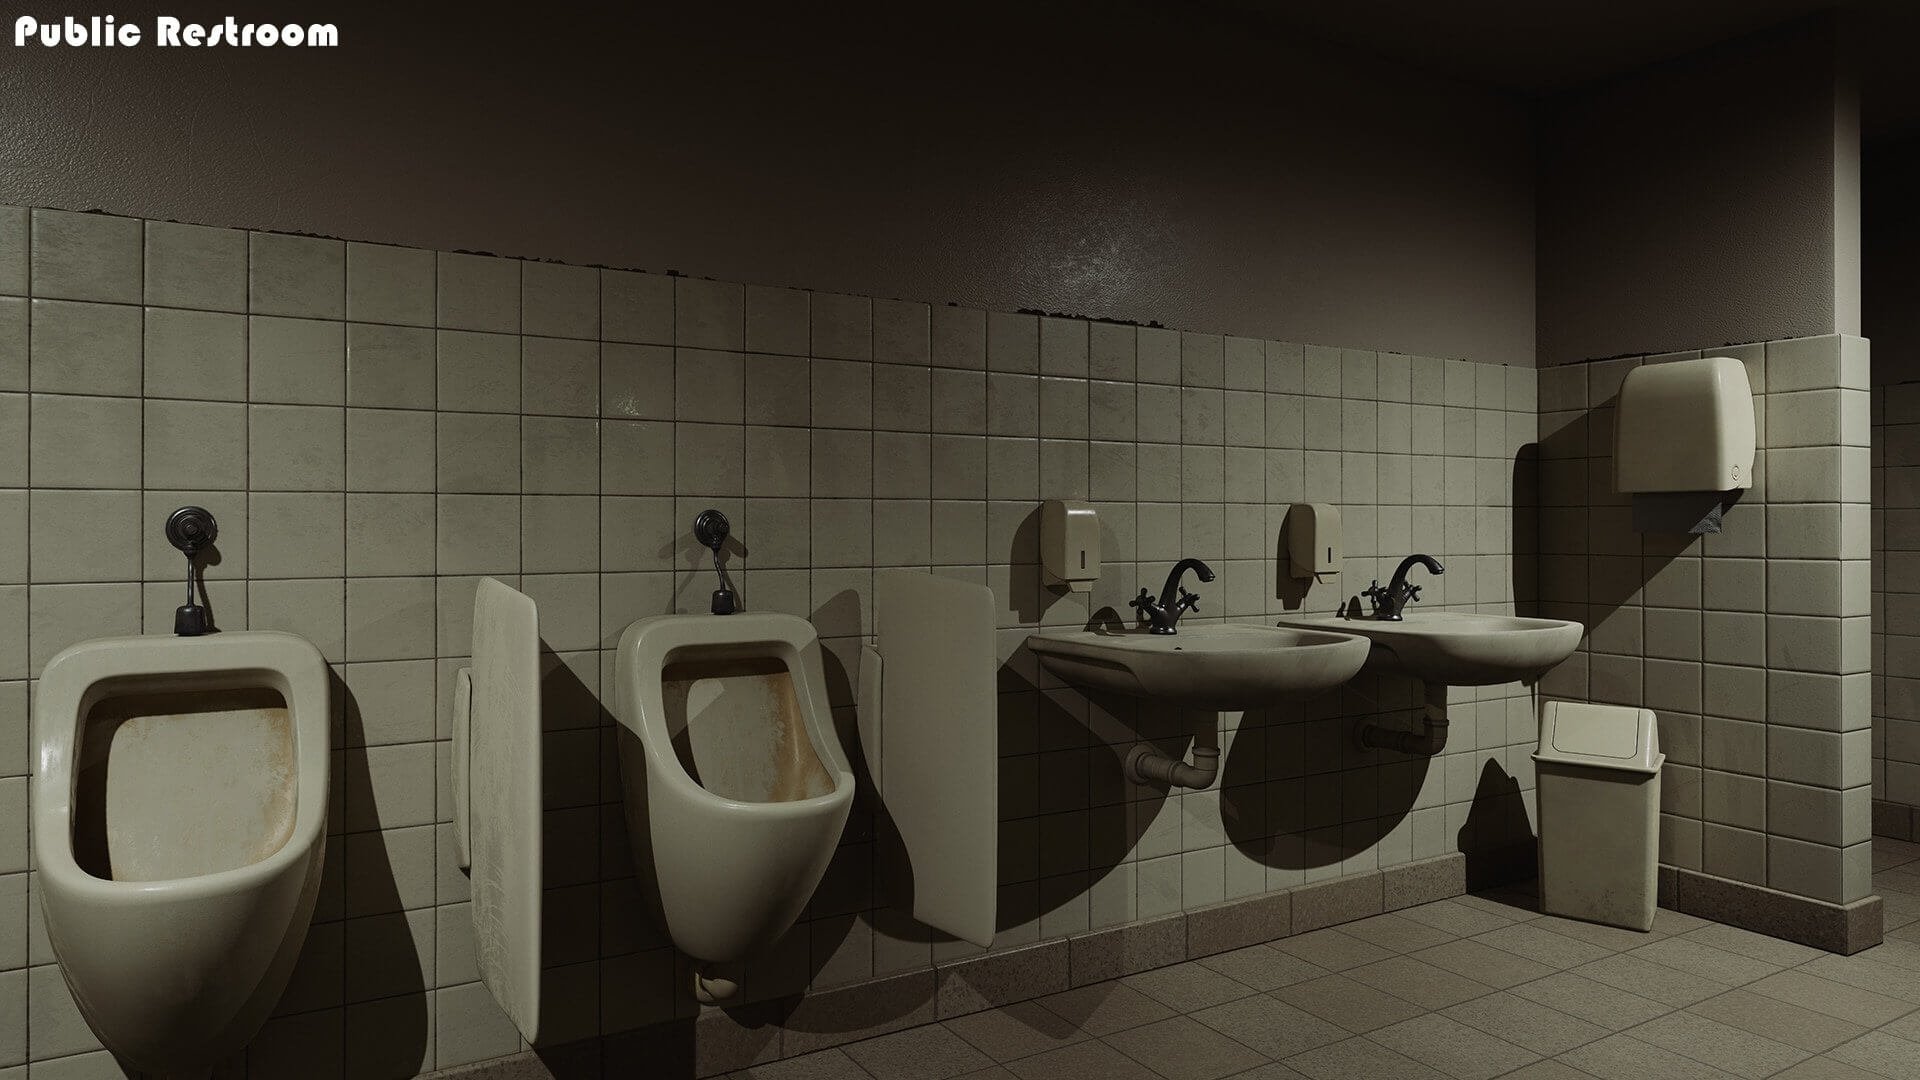 Nightmare at the Public Restroom – Biscuits 'n Crazy